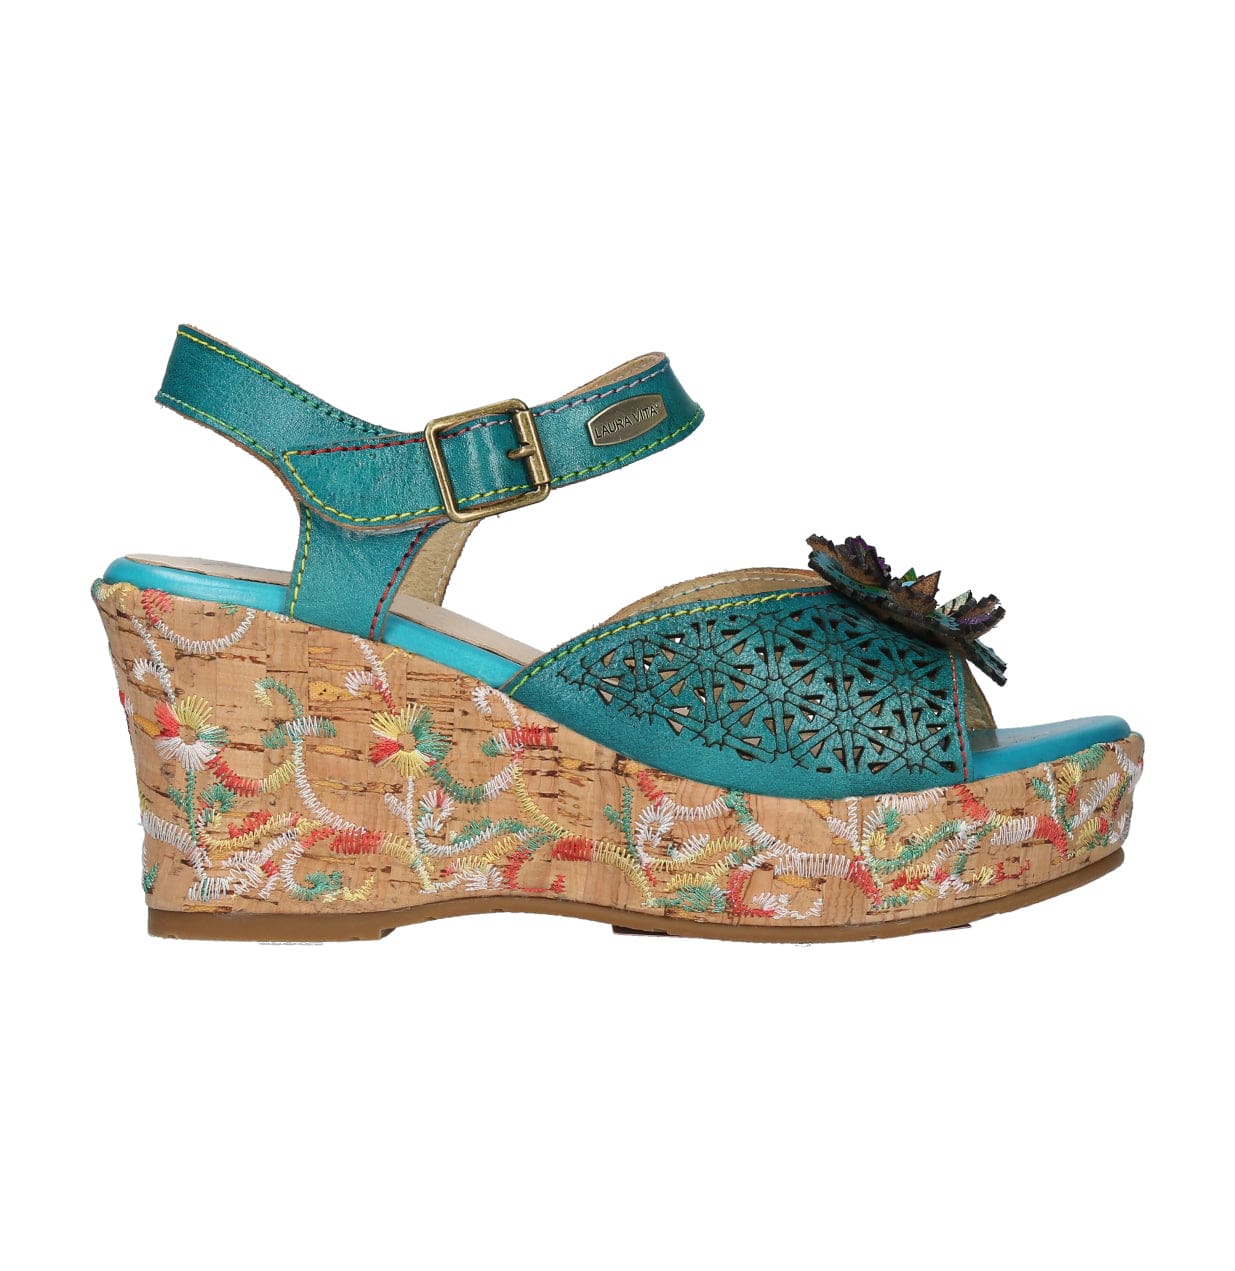 LORIEO 08 shoes - 35 / Turquoise - Sandal